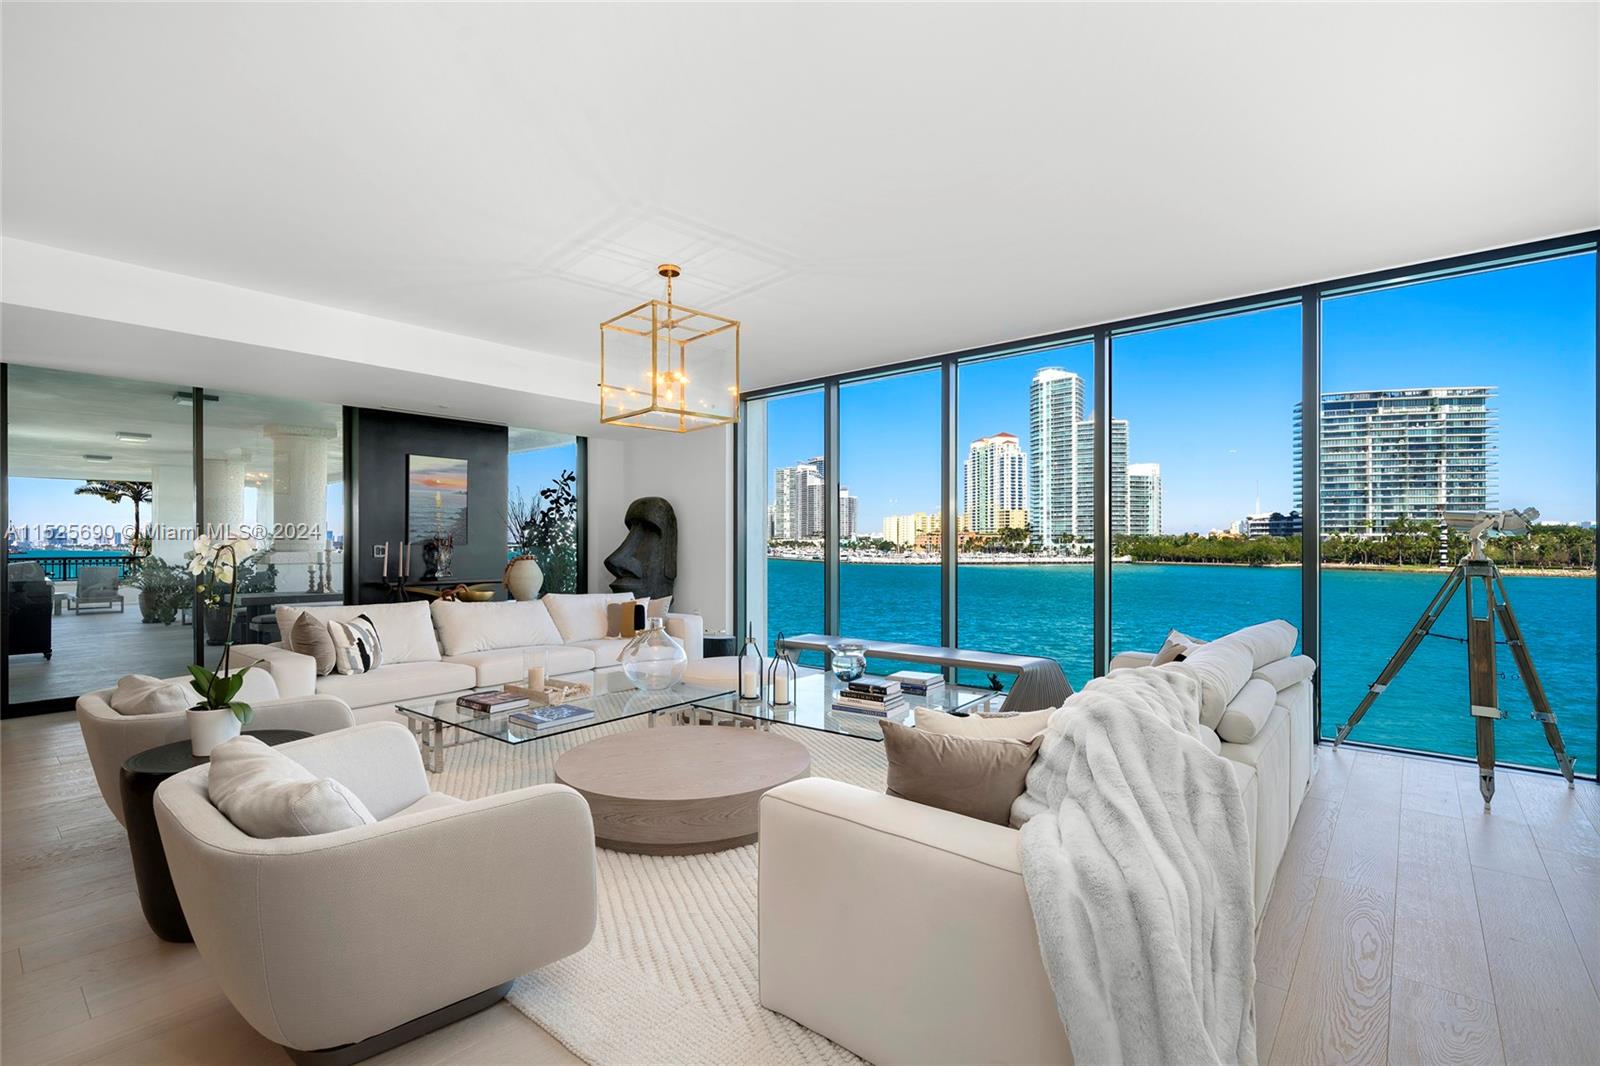 This stunning contemporary corner unit at the Palazzo Della Luna is offered furnished. Private elevator entry, featuring 4BR/4+1BA and 4,904 SF of luxury. Wide plank oak wood floors throughout, extended flow through family, dining & living room with access to a wraparound terrace made to entertain w/direct views to Biscayne Bay, Government Cut, Miami Beach & Ocean. Custom Boffi designed kitchen features granite countertops, top-of-the-line Miele & Sub-Zero appliances. Elegant principal suite surrounded by walls of glass w/direct water views, dual walk-in closets & beautiful bathroom w/Carrara marble rain shower & soaking tub. Three other bedrooms are each spacious w/en-suite bathrooms. The unit boasts one of the largest wraparound terraces & combined with a back terrace totals 2,417 SF.